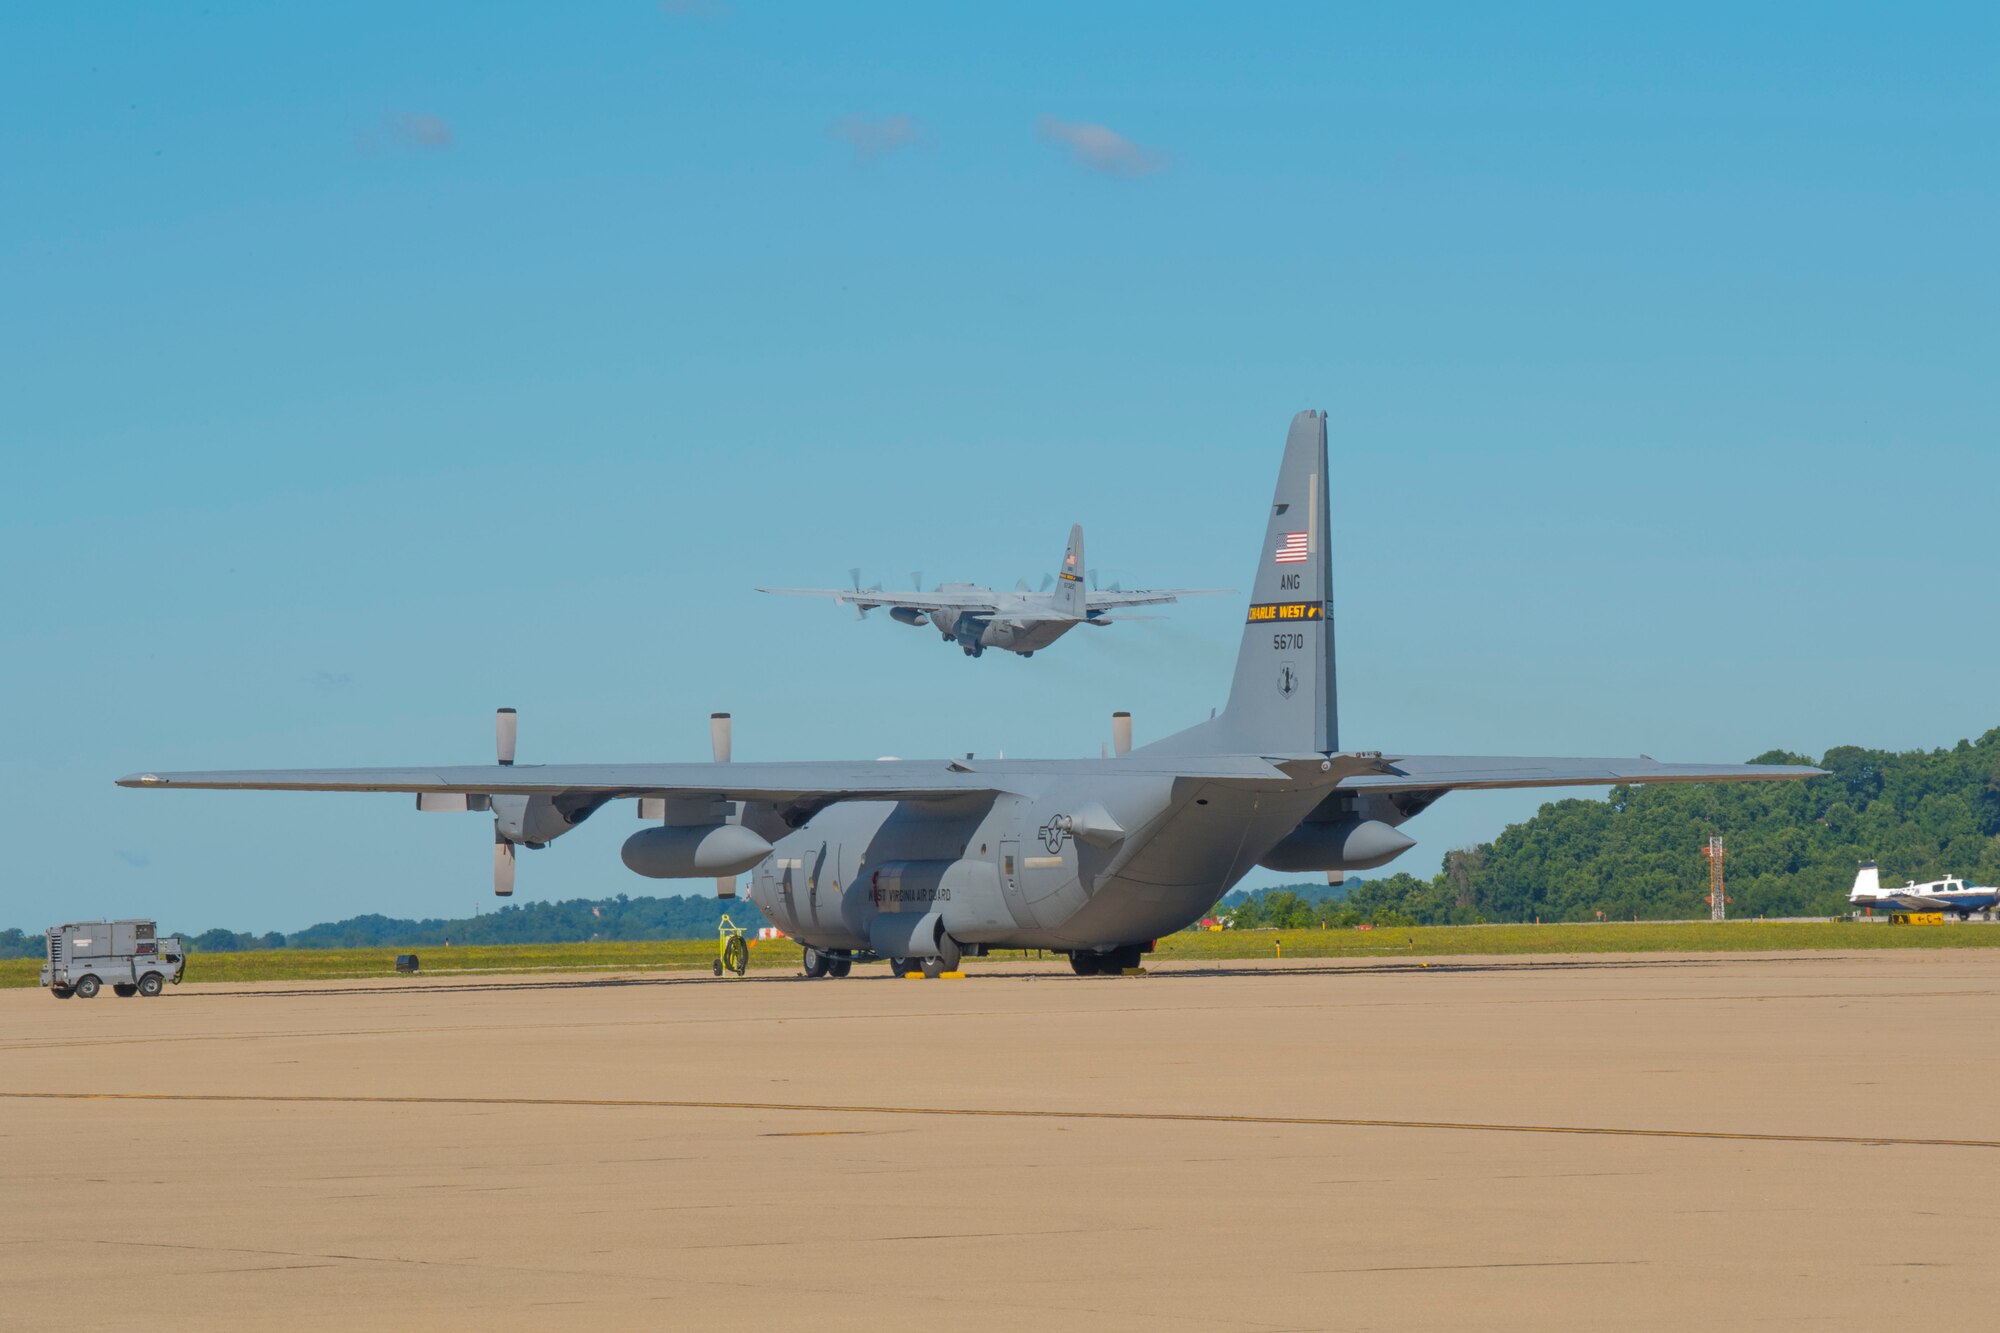 Members of the 130th Airlift Wing, McLaughlin Air National Guard Base, Charleston, W.Va., leave for an Aerospace Expeditionary Force (AEF) deployment in support of Operation Freedom’s Sentinel June 27, 2017. More than 100 members of the wing will be providing tactical airlift, maintenance and medical support, among other critical tasks, during their deployment. (U.S. Air National Guard photo by Staff Sgt. Adam Juchniewicz)